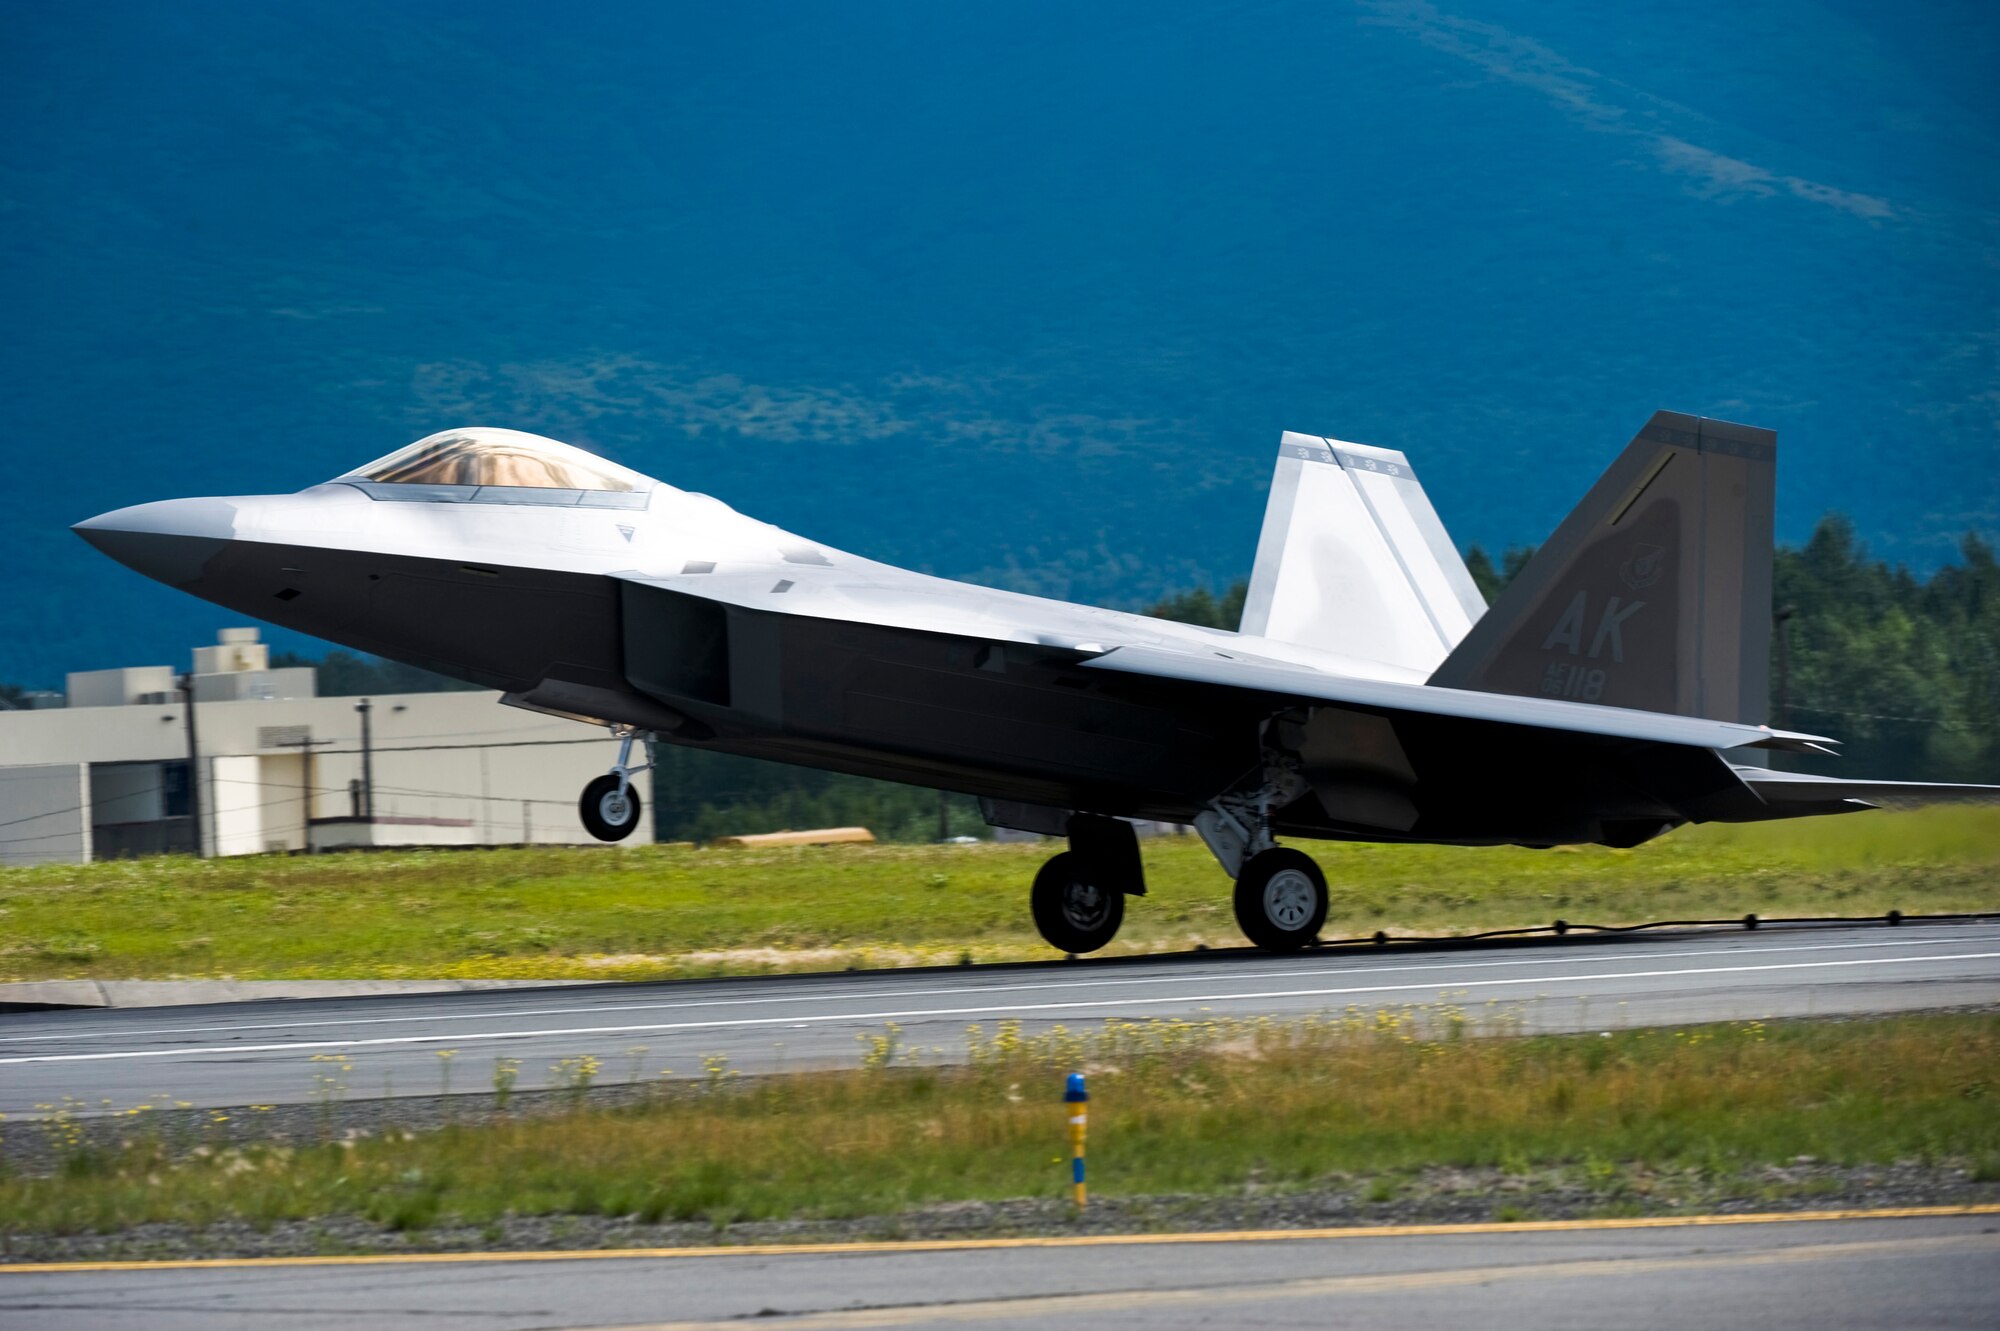 ELMENDORF AIR FORCE BASE, Alaska -- A newly arrived F-22A Raptor touches down Aug. 13. The Raptor is assigned to the 525th Fighter Squadron. (U.S. Air Force photo/Senior Airman Jonathan Steffen)